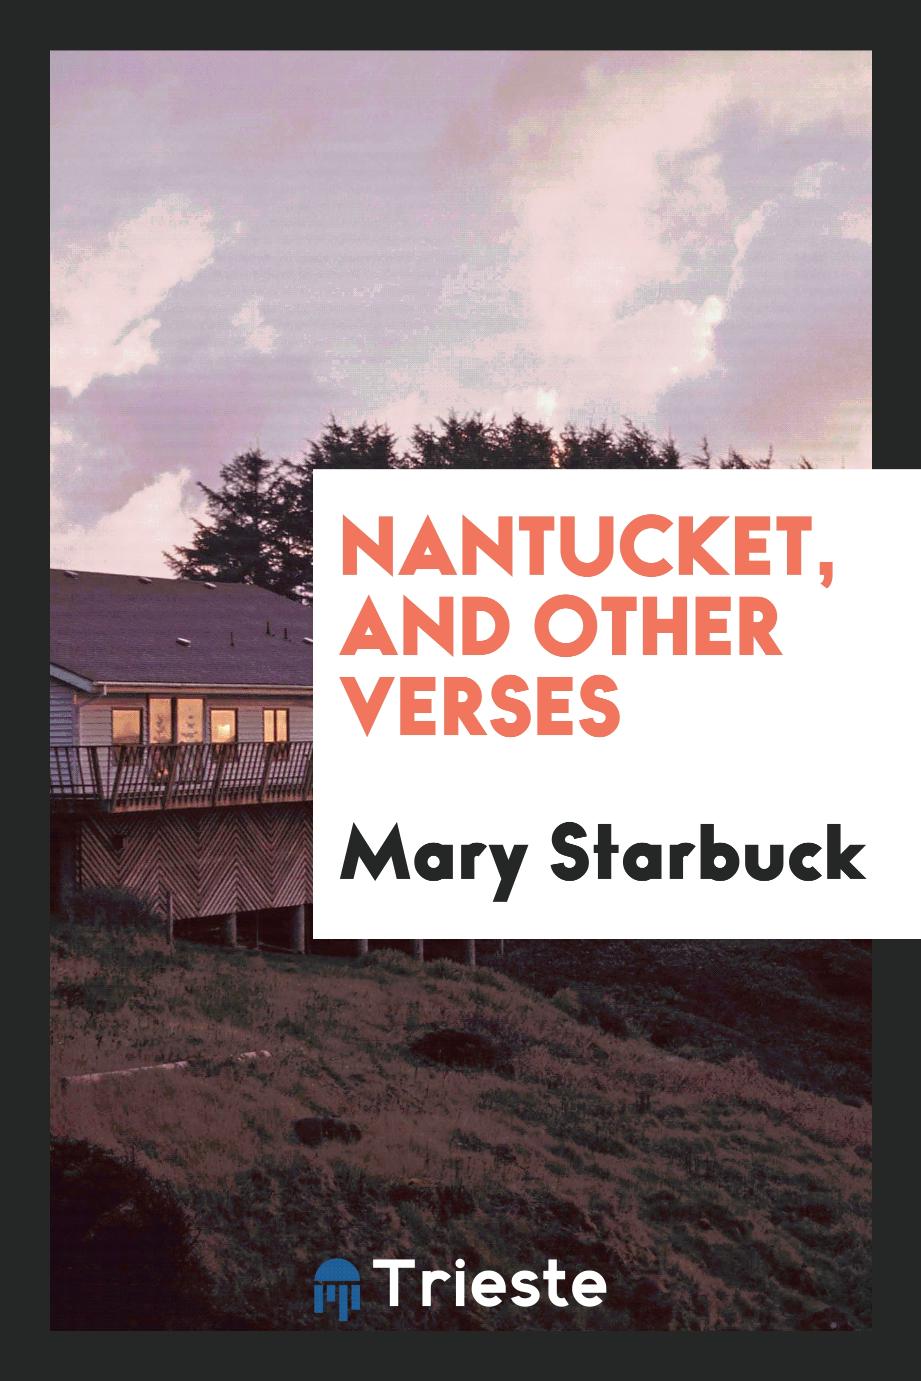 Nantucket, and other verses